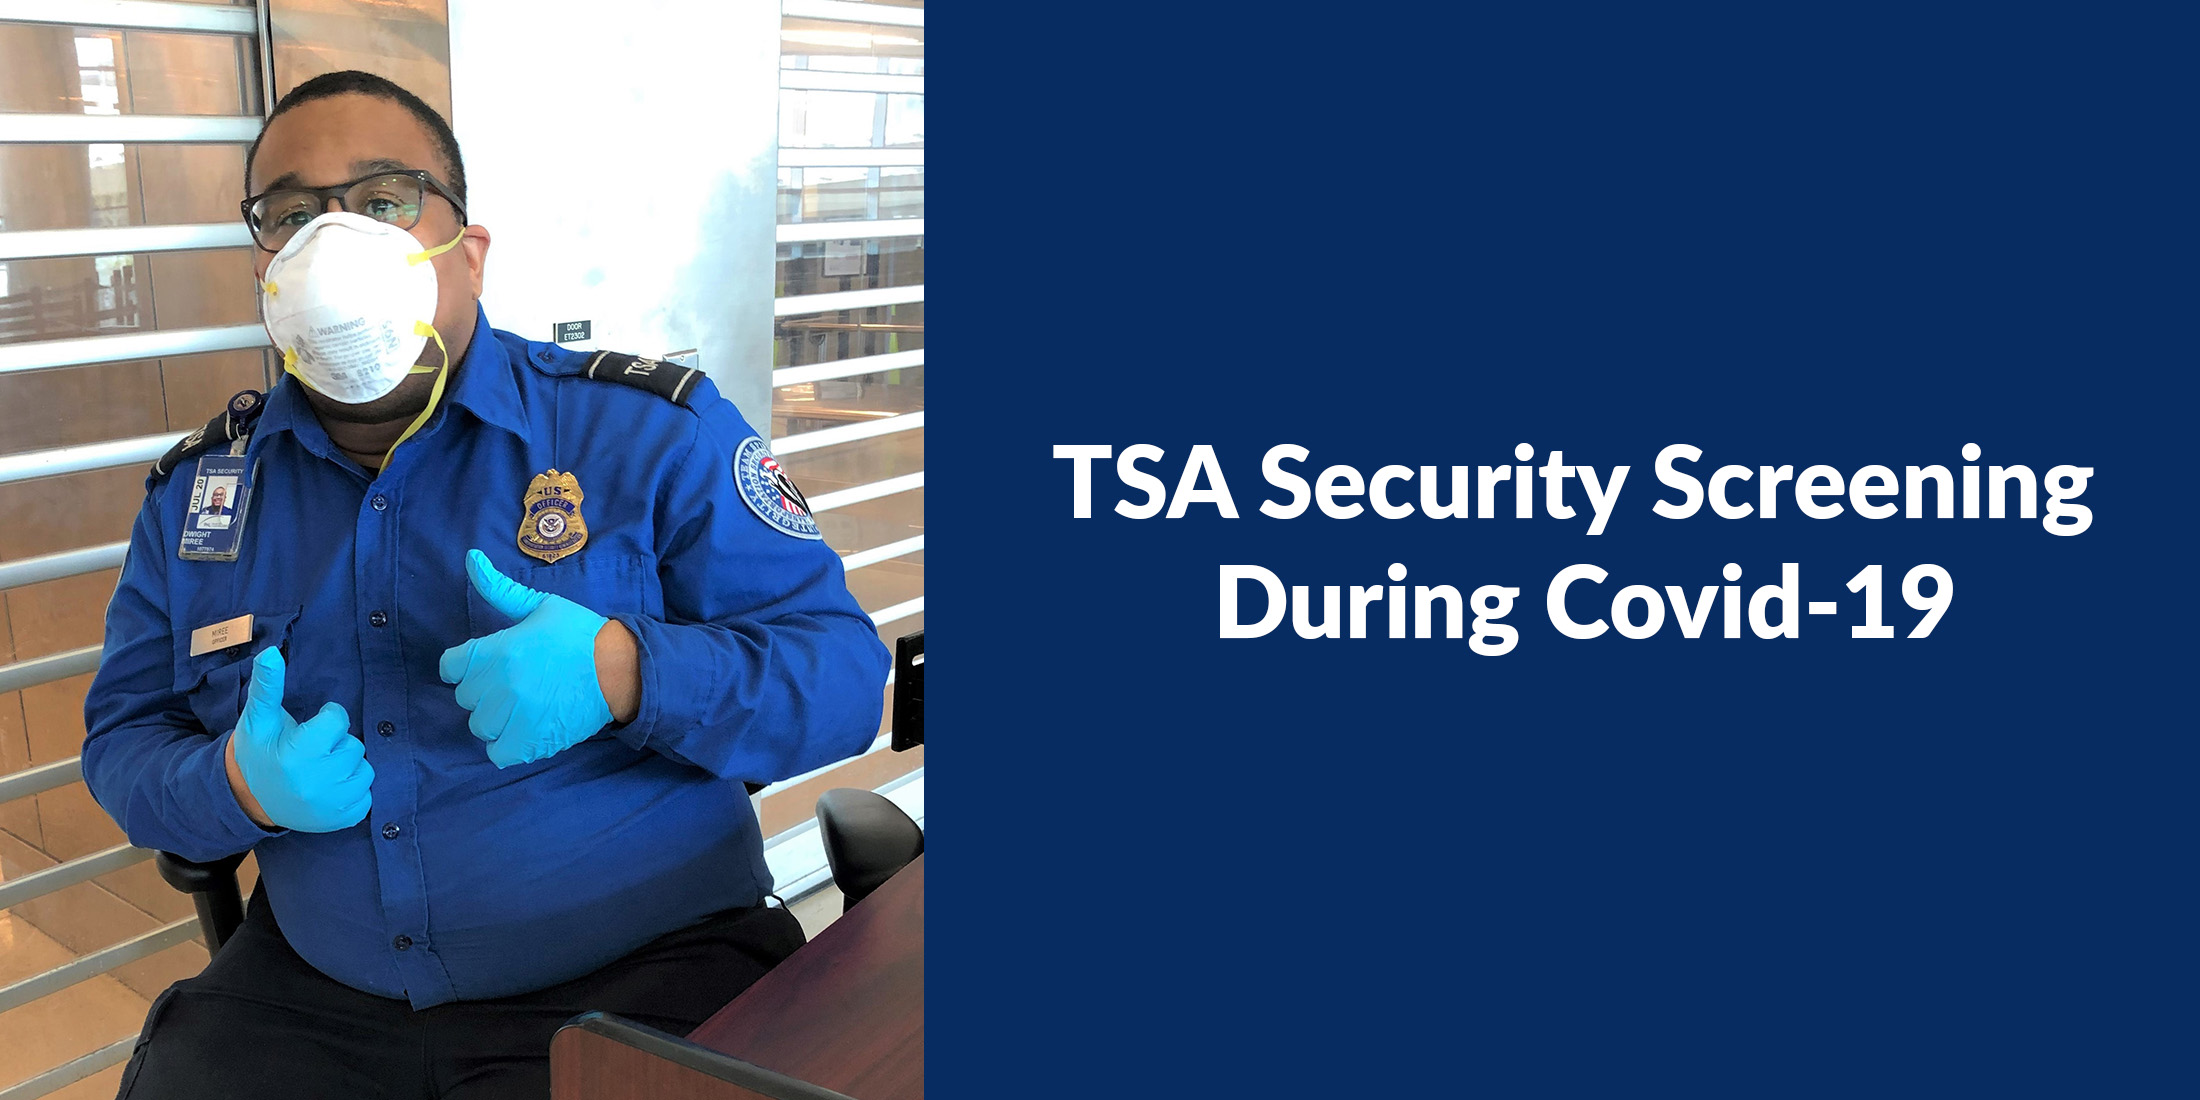 TSA officers take precautions to keep themselves and travelers safe